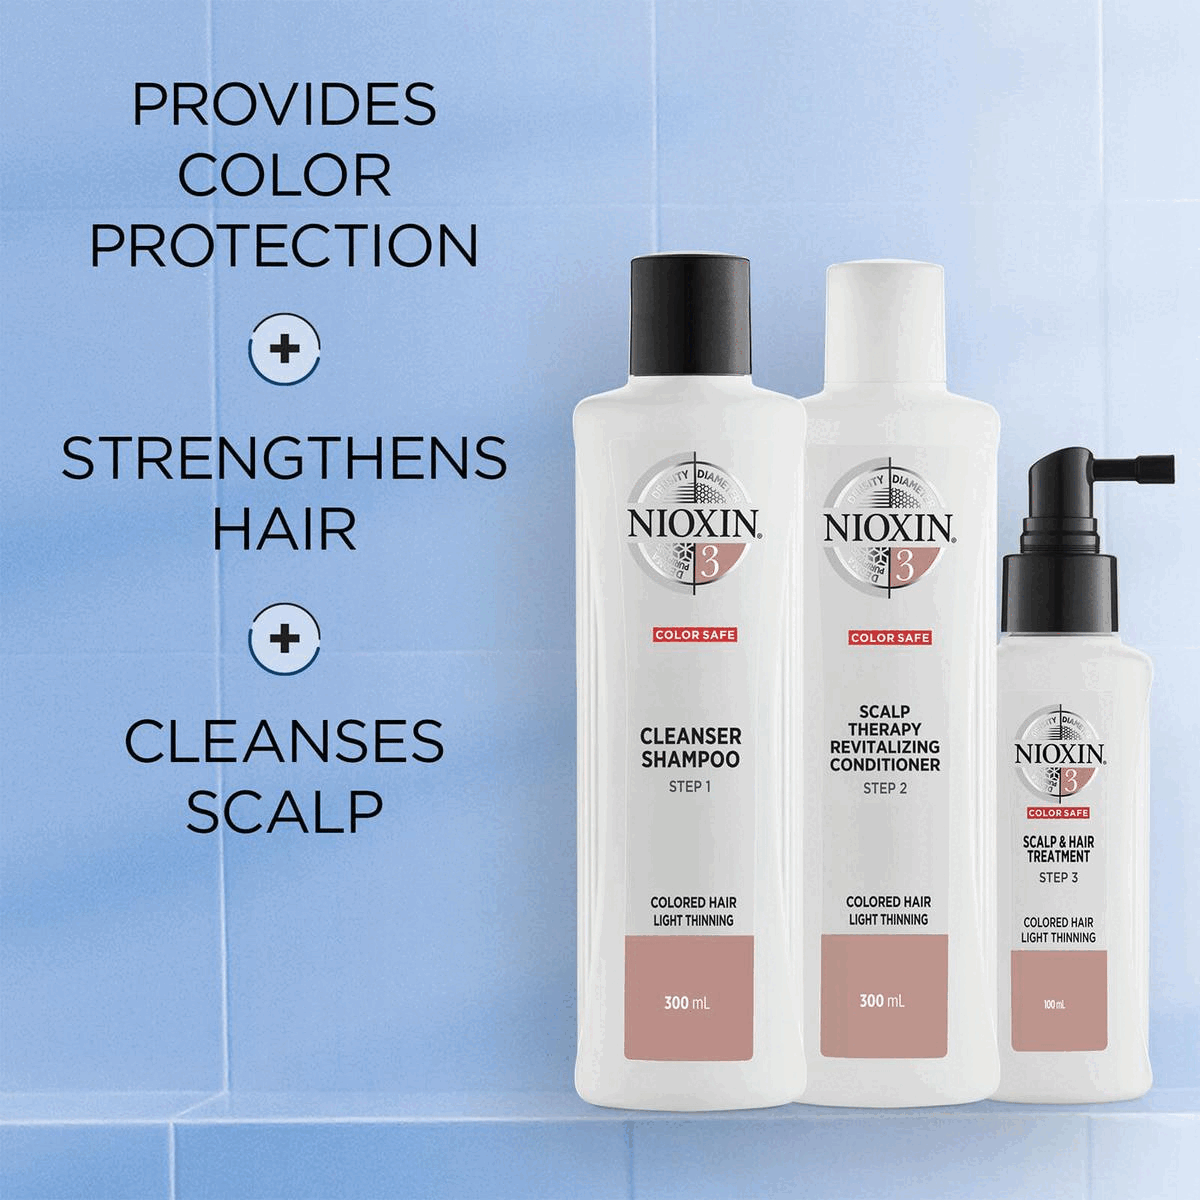 Provides colour protection + strengthens hair + cleanses scalpHow to use Nioxin System Kit No.2 for natural hair with light thinning. 
            Step 1 cleanser shampoo: gently massage into hair and scalp, rinse well. 
            Step 2 Scalp Therapy revitalising conditioner: apply from scalp to ends, leave in for 1 to 3 minutes. Rinse.
            Step 3 Scalp & Hair Treatment: Shake well. Apply evenly to entire scalp. Do not rinse.Trial Size Kit - Daily Use 30 Days.
            Full Size Kit - Daily Use 90 days Dermatologically tested, clinically proven - Dr Caroline Robinson, MD, FAAD, Board-Certified Dermatologist


            